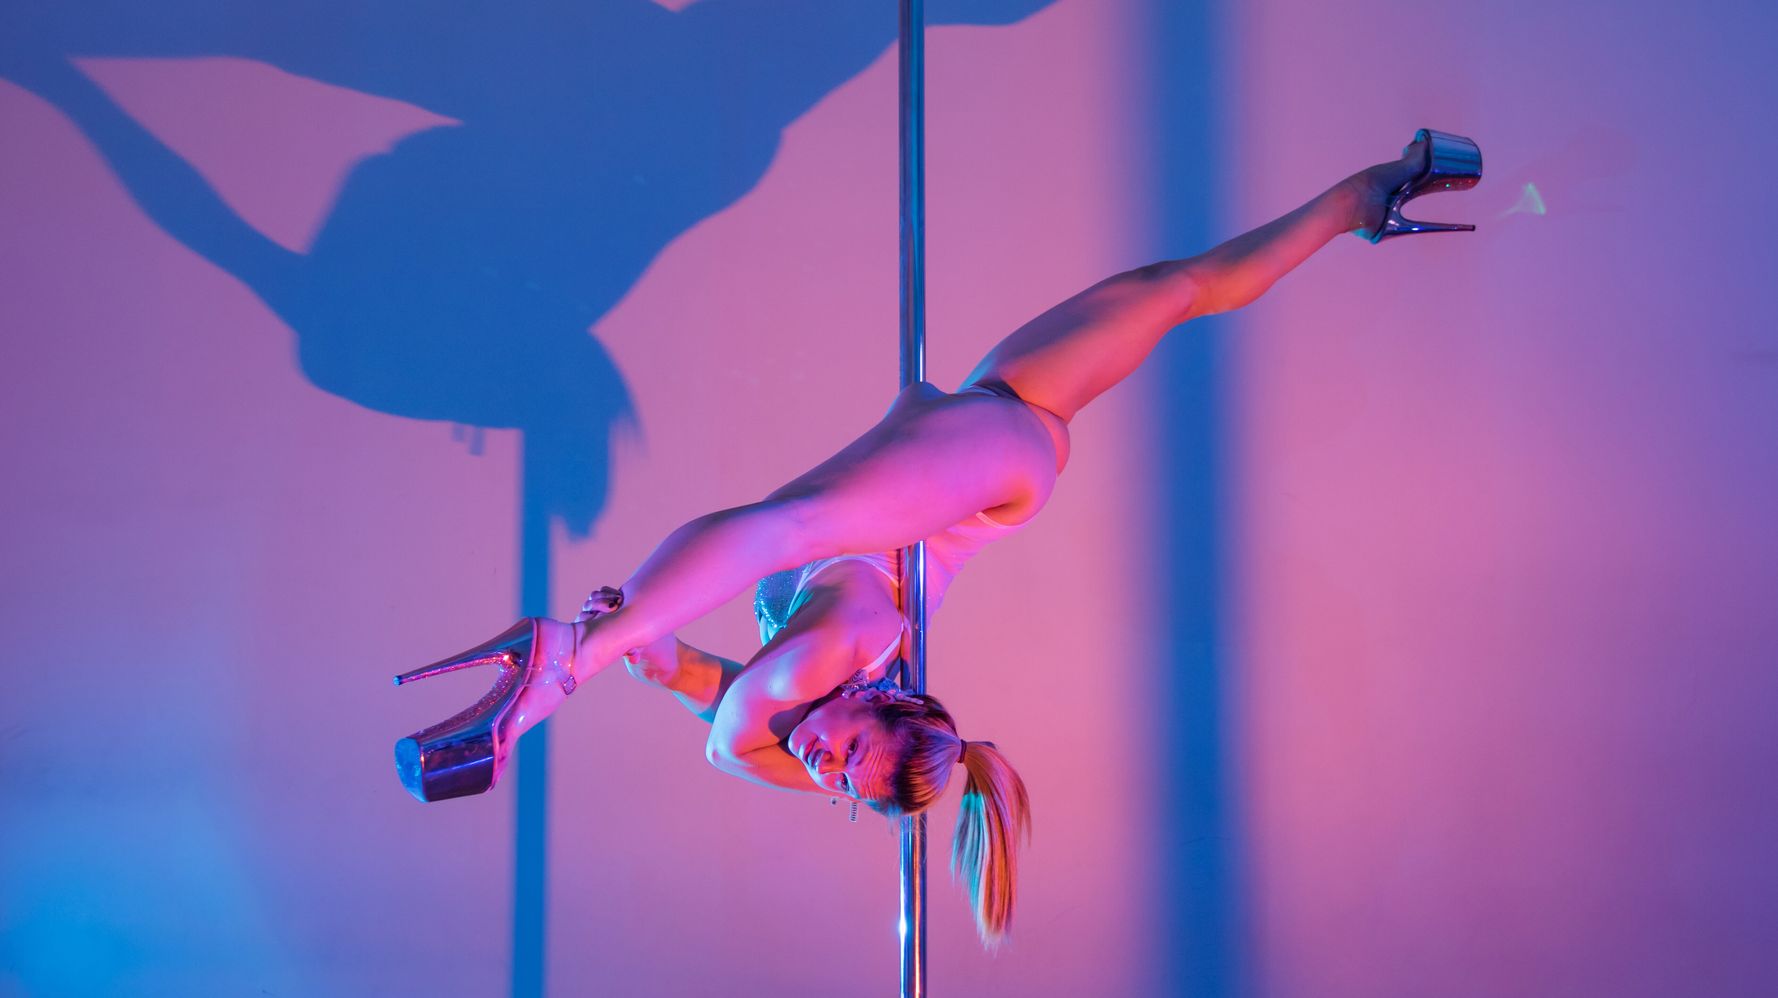 Pole - When I Was Outed For My Porn Past, Pole Dancing Helped Me Heal | HuffPost  HuffPost Personal